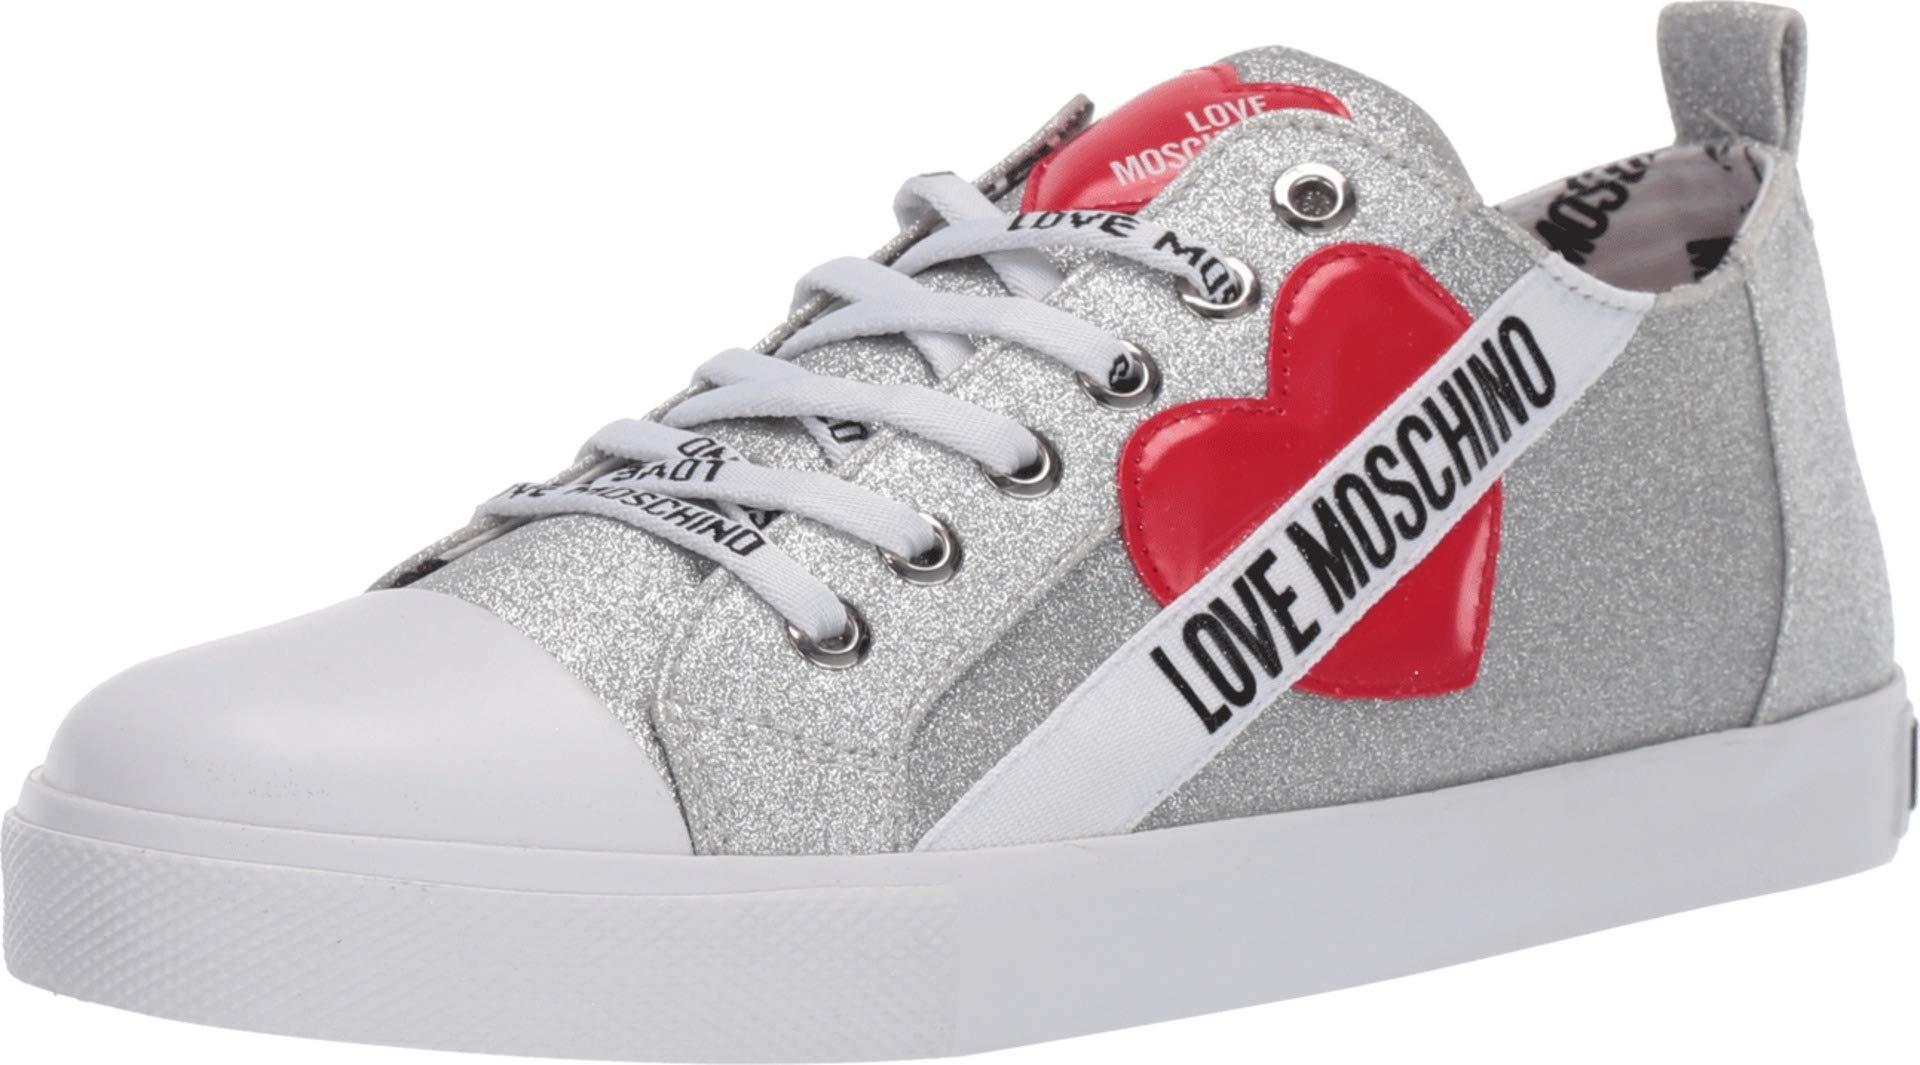 Love Moschino Synthetic Glitter Shoes in Silver (Metallic